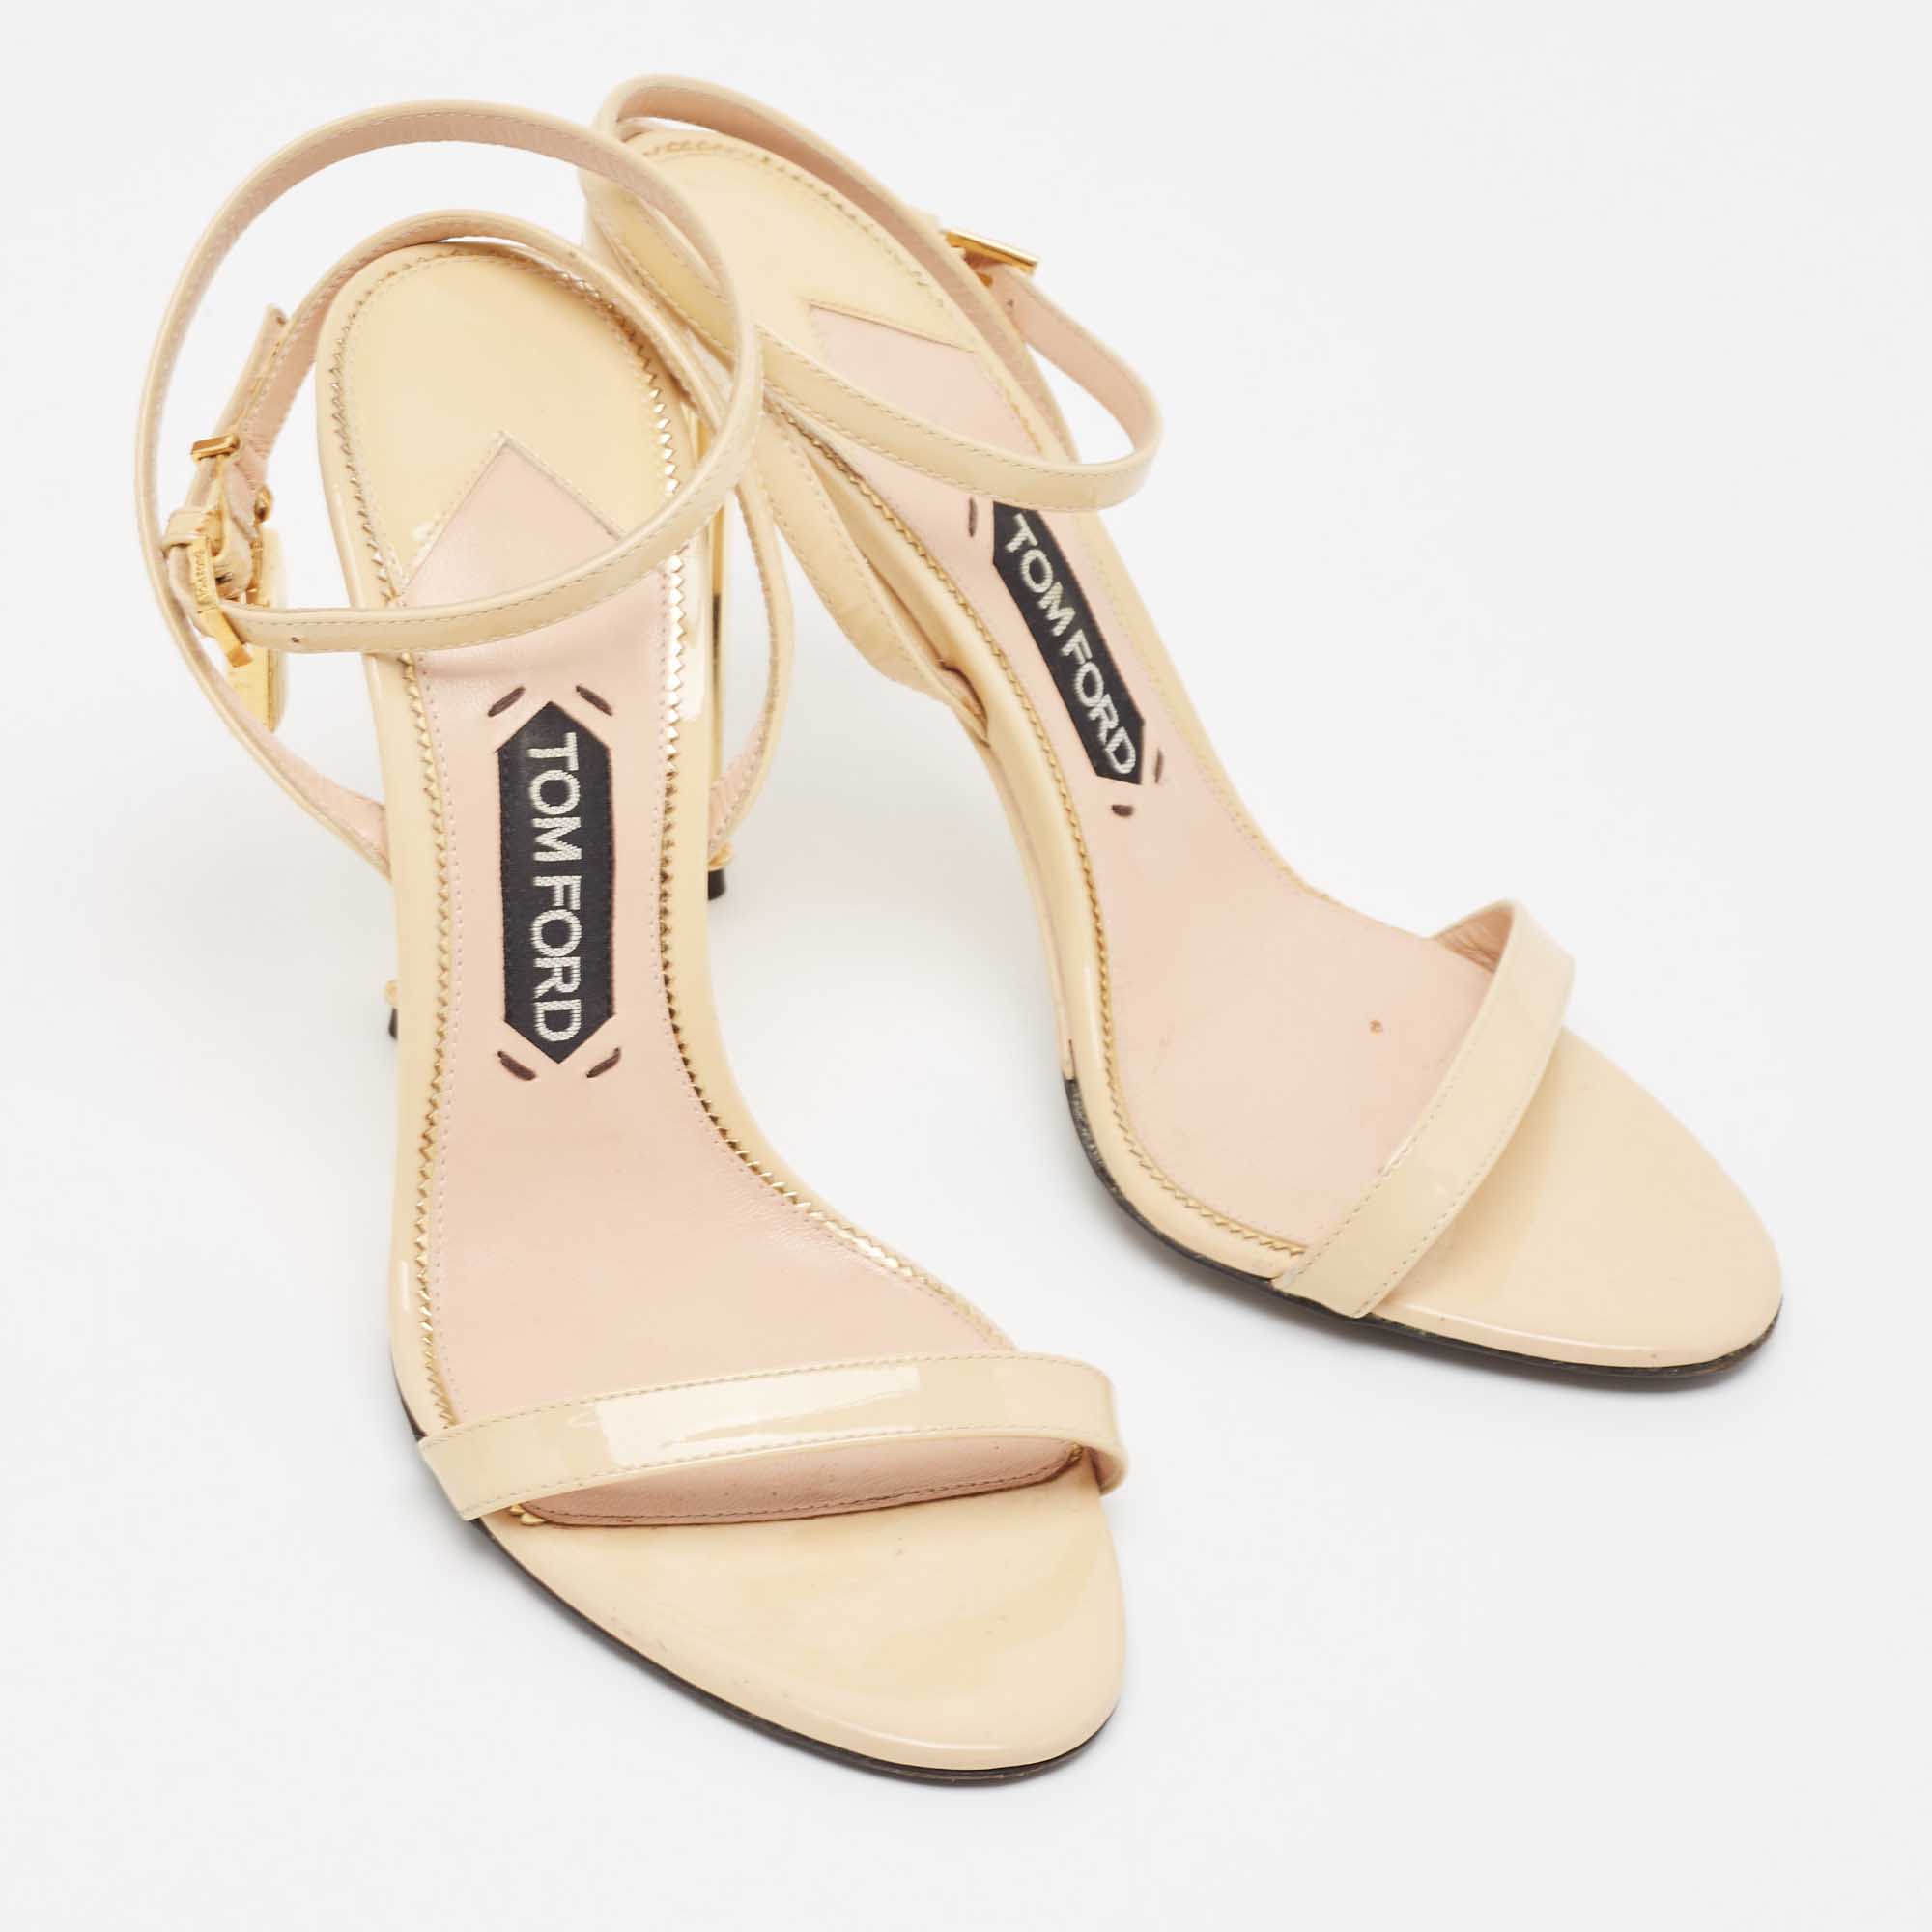 Tom Ford Cream Patent Leather Padlock Ankle Strap Sandals Size 39